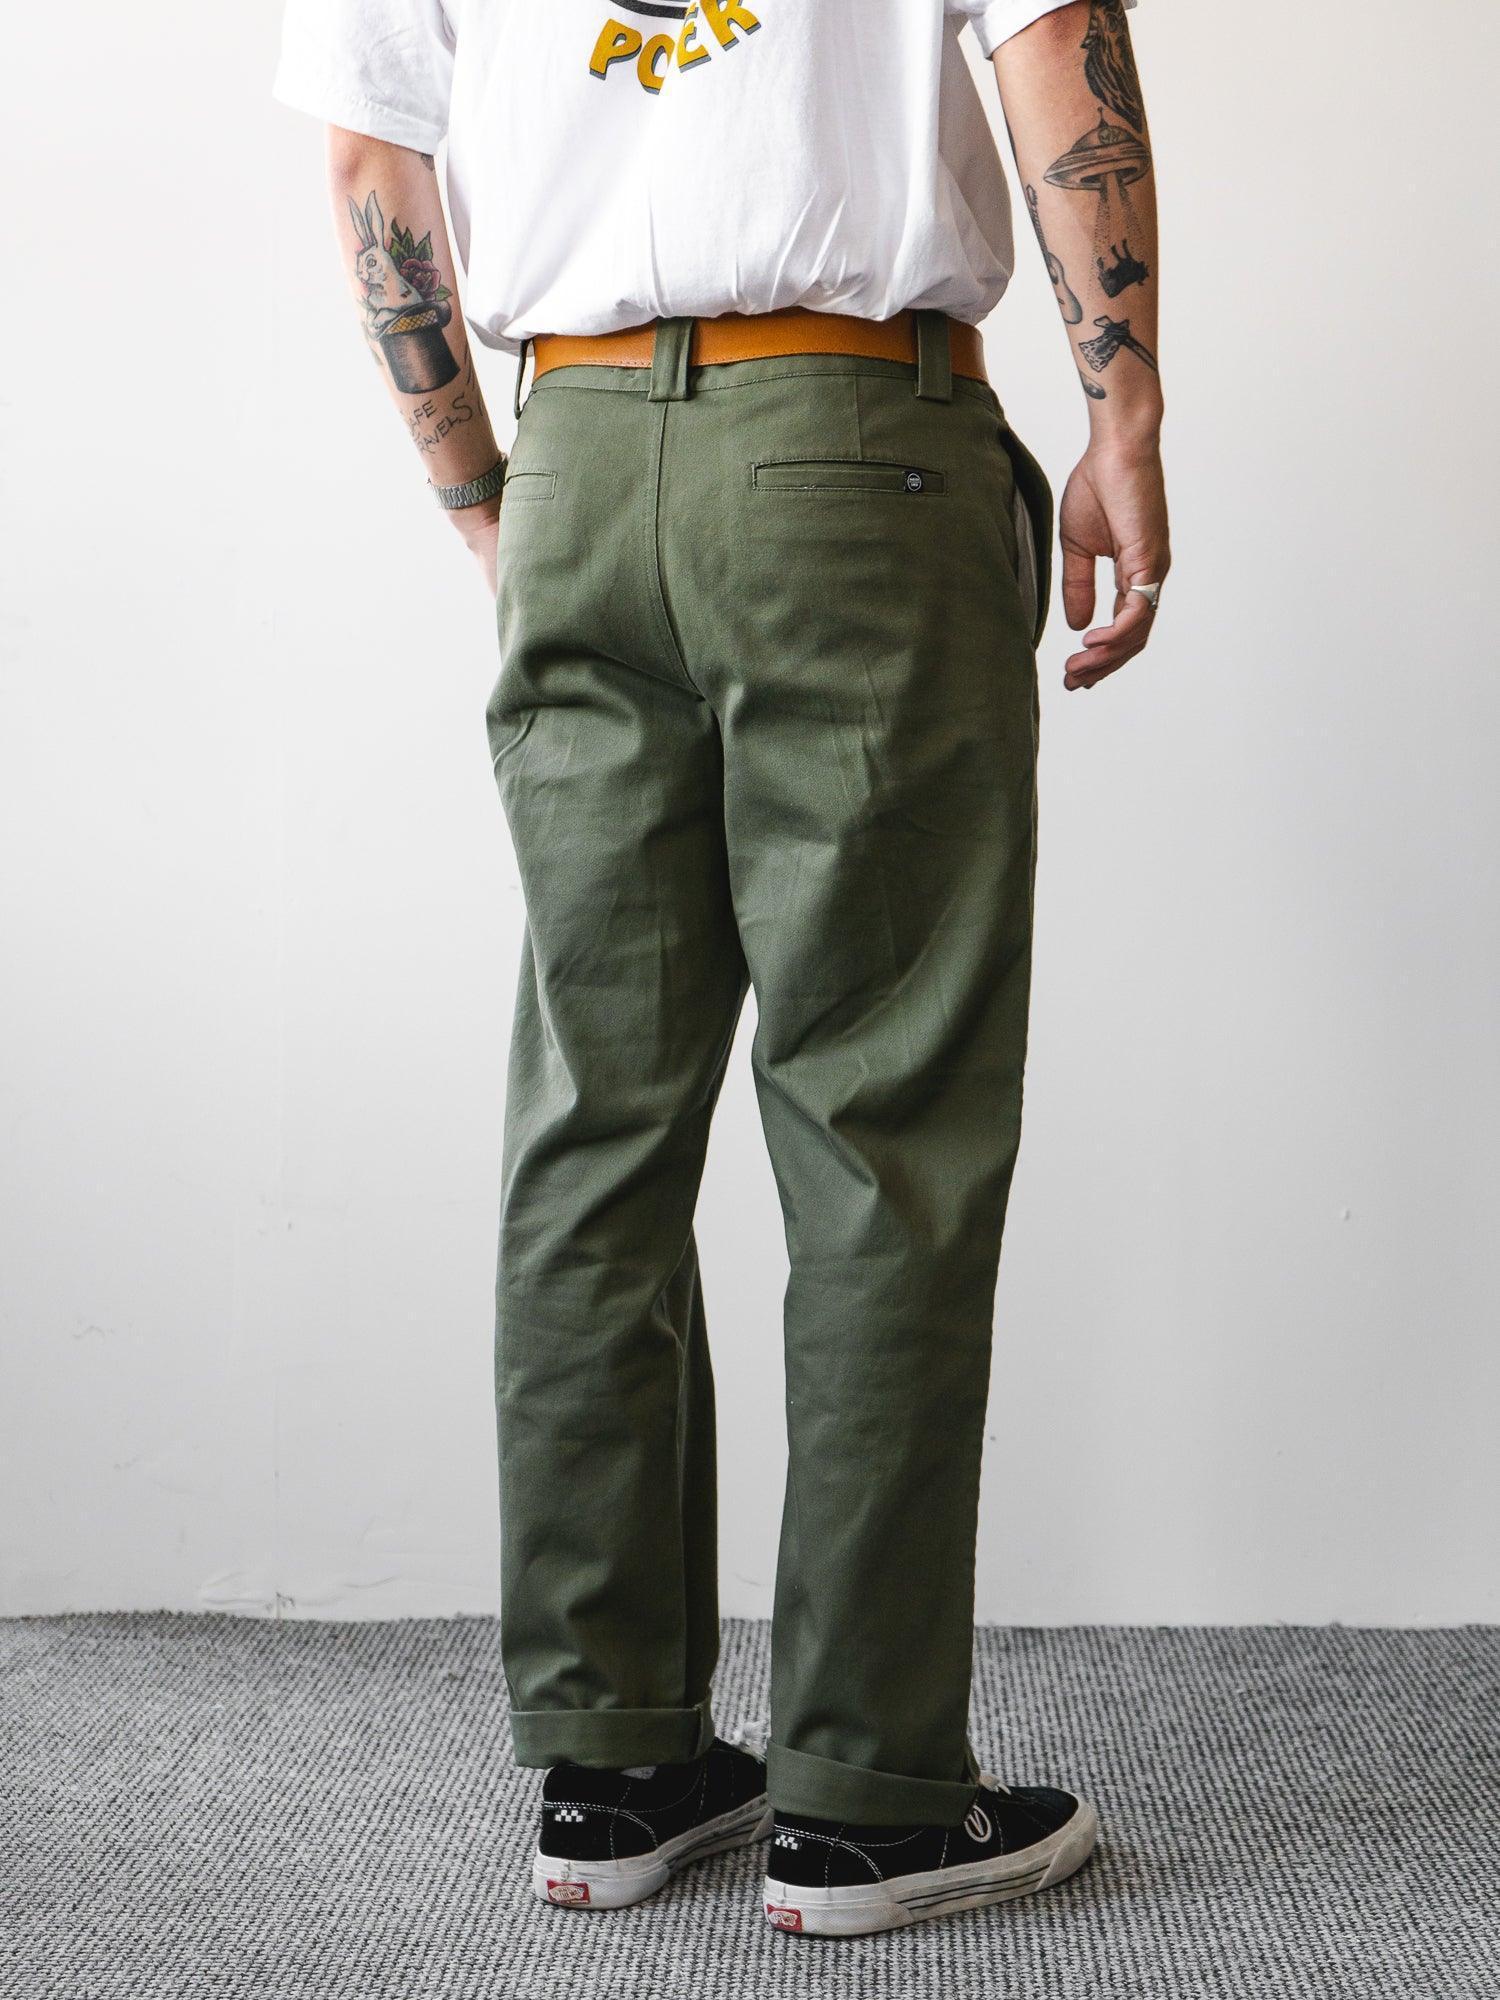 Watershed Standard Issue Trousers - Olive